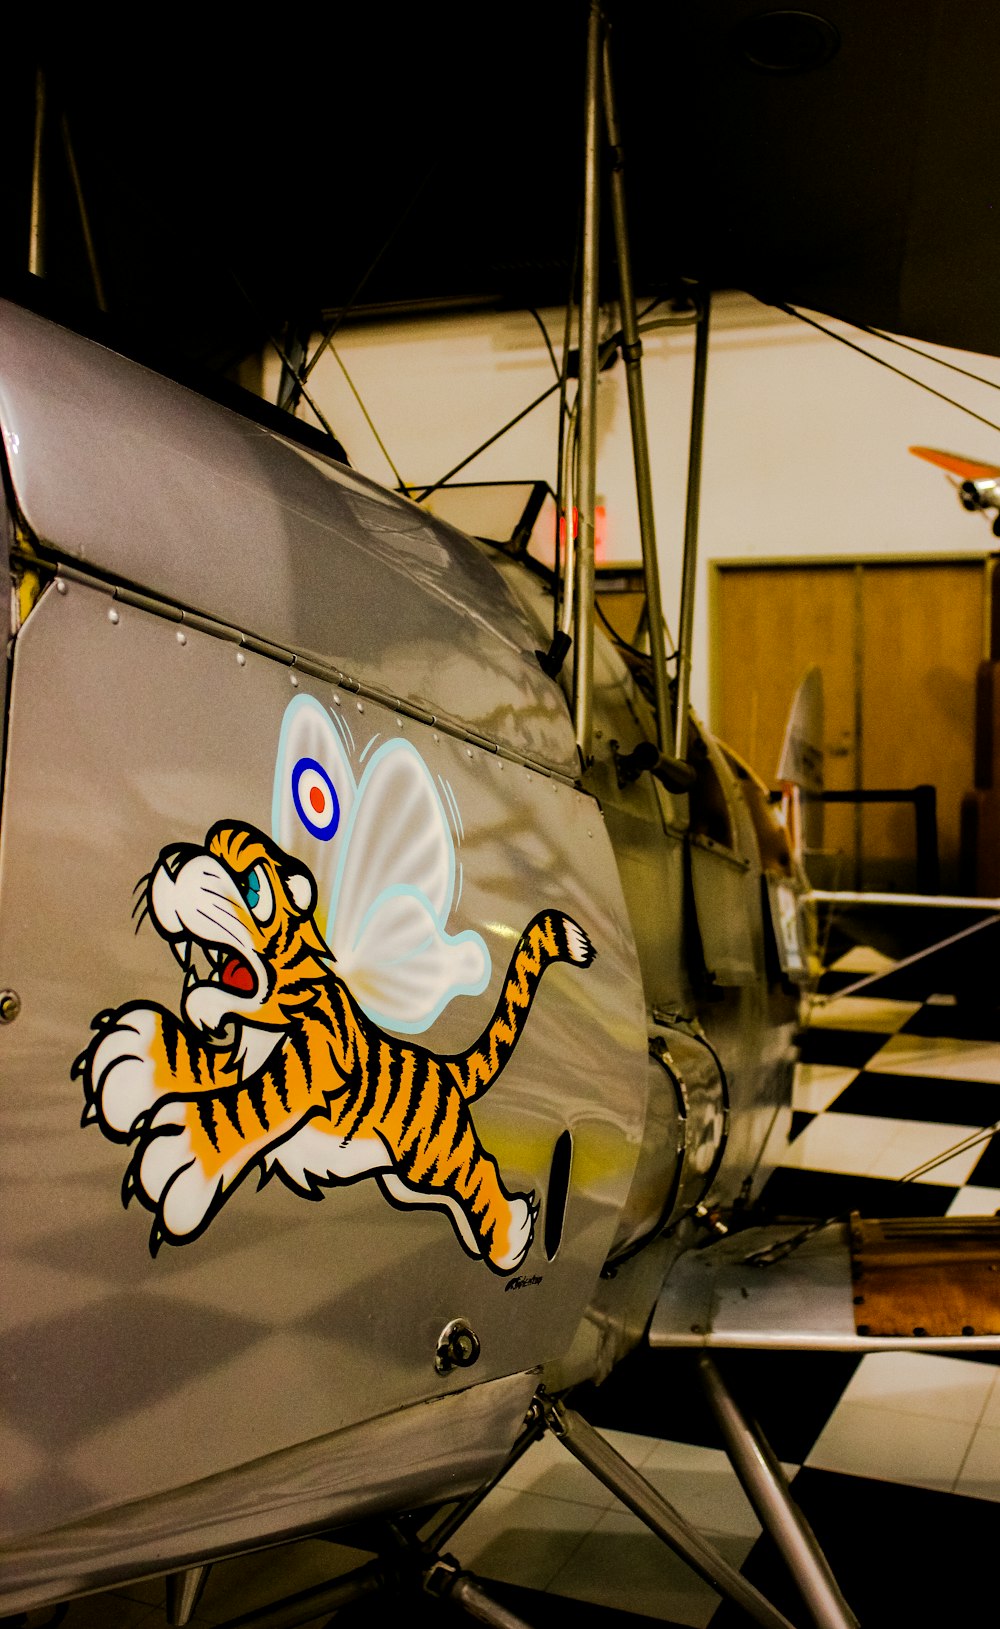 a close up of a plane with a tiger on it